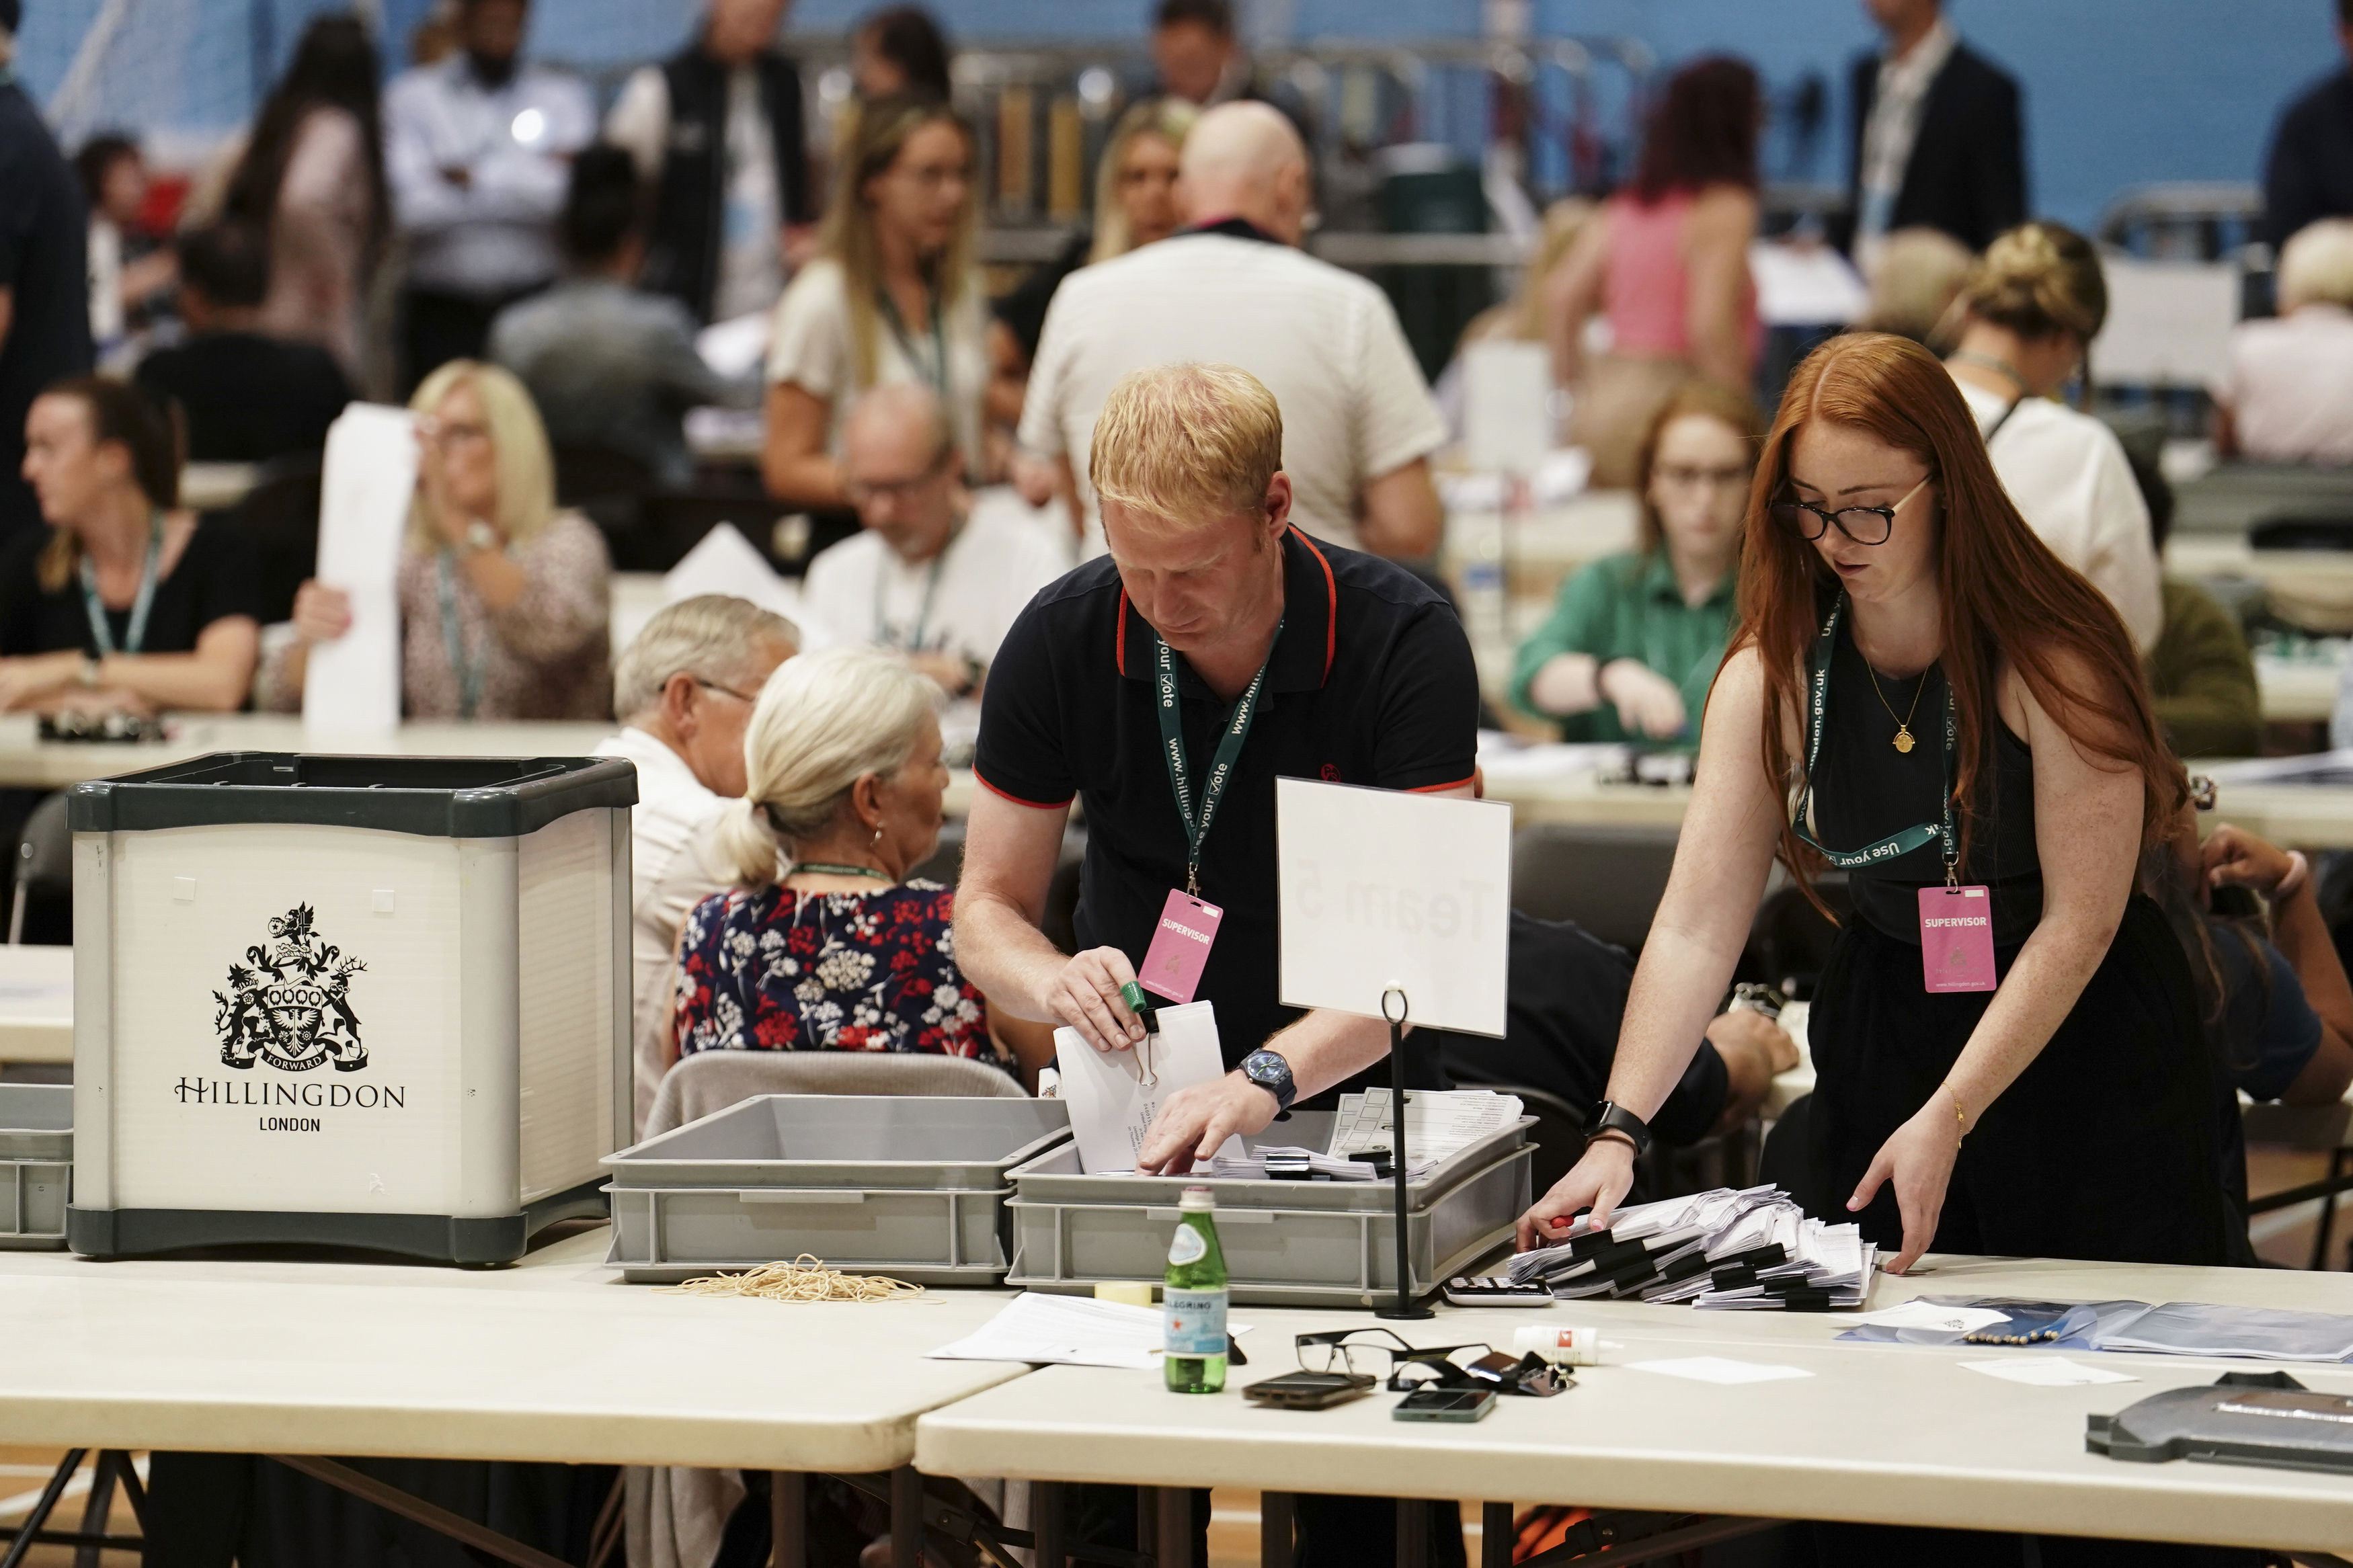 Ballots are counted at Queensmead Sports Centre in South Ruislip, west London, on July 20. Photo: PA via AP